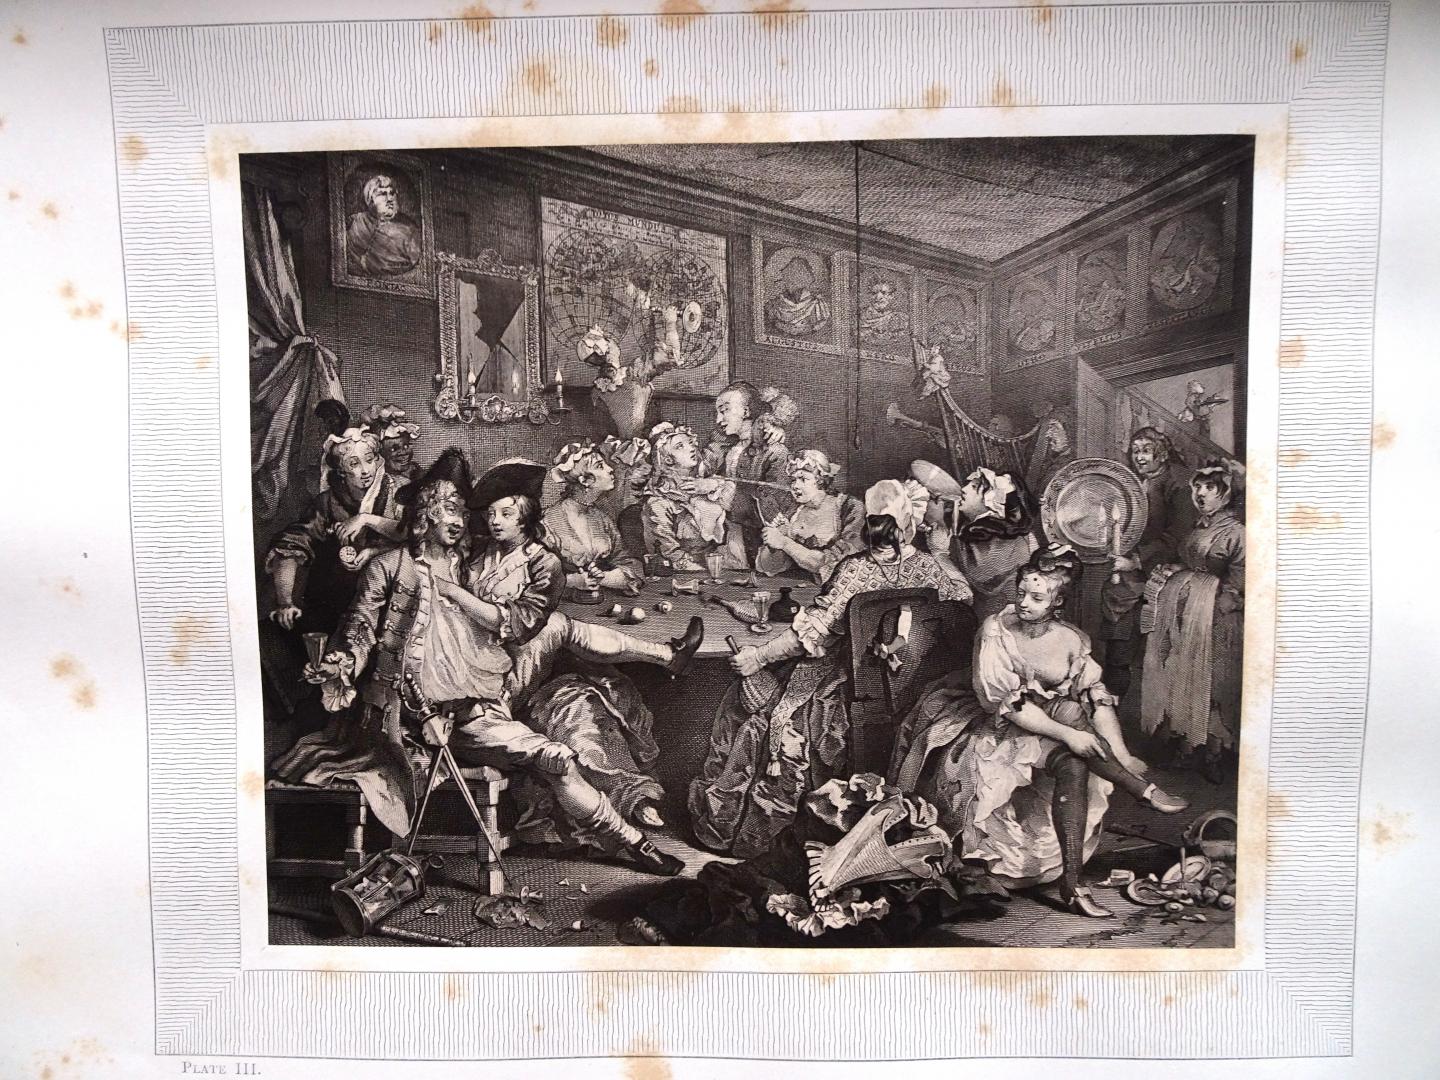  - THE WORKS OF WILLIAM HOGARTH Reproduced from the original engravings in permanent photographs and newly described. With an essay on the genius and character of Hogarth by Charles Lamb. In 2 vols.